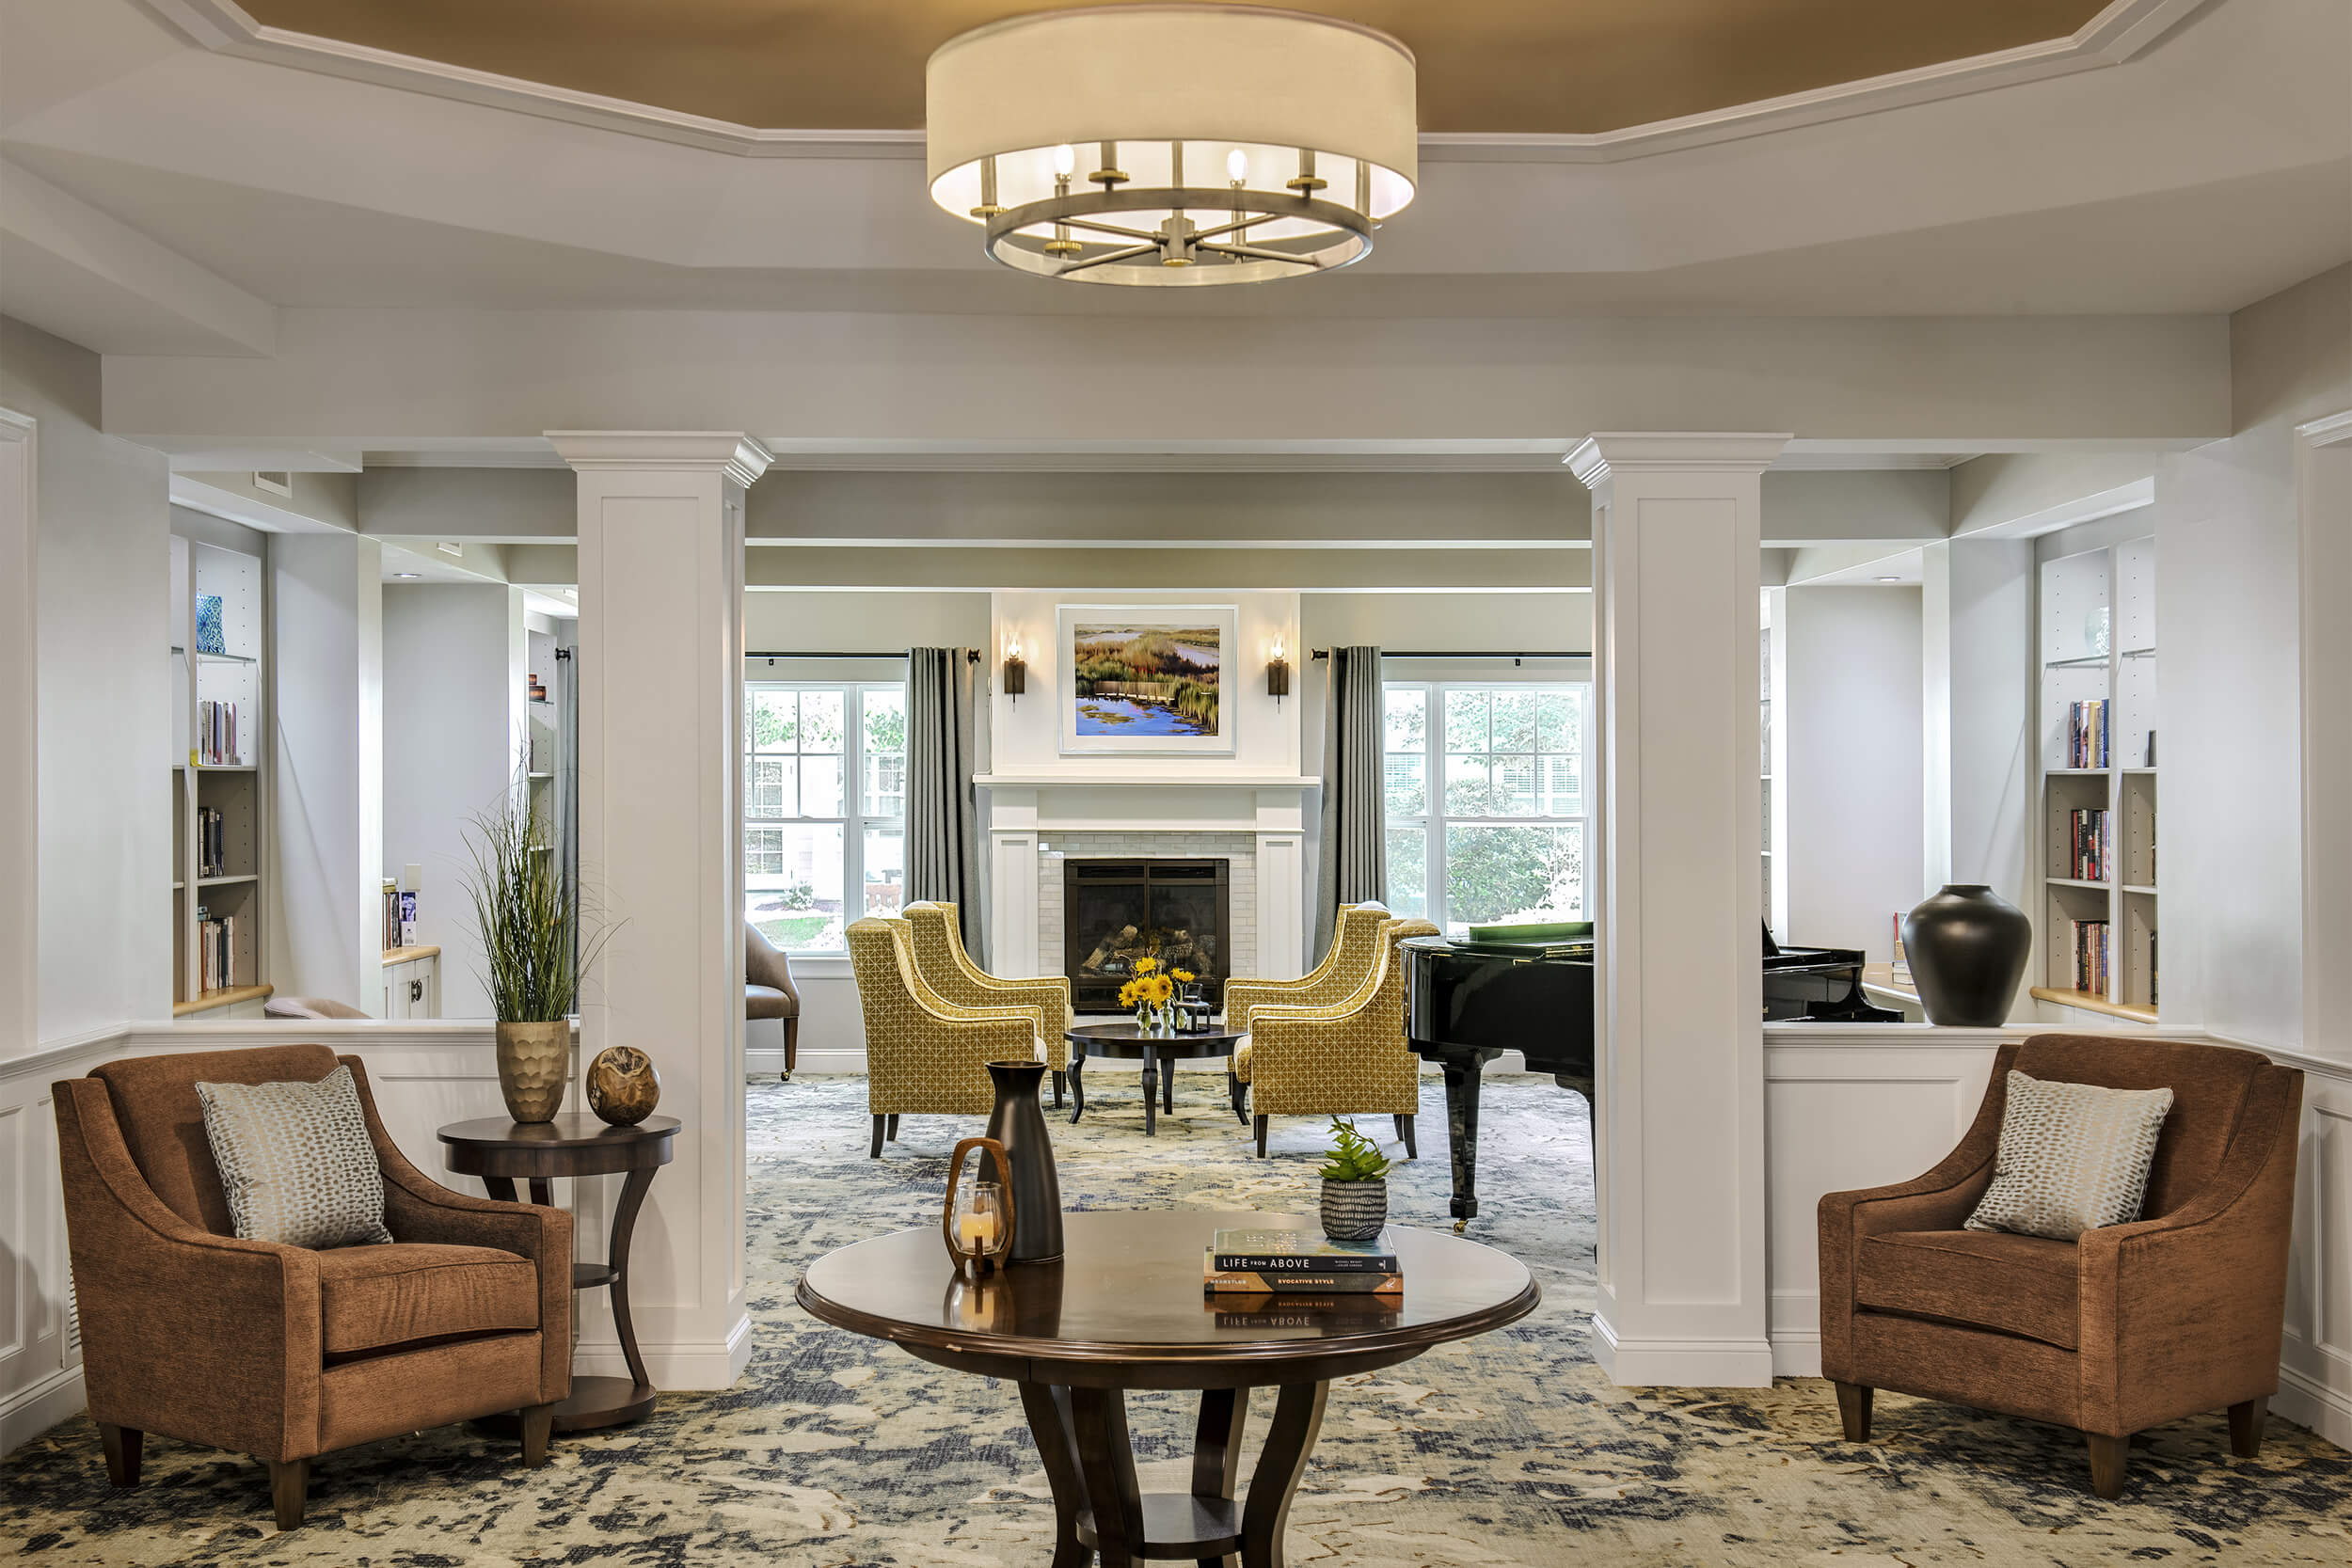 Interior view of a lobby at a senior living facility. An open area features several upholstered lounge chairs, a circular table in the middle with decorative centerpieces, and in the background a fireplace can be seen with yellow upholstered chairs around it.